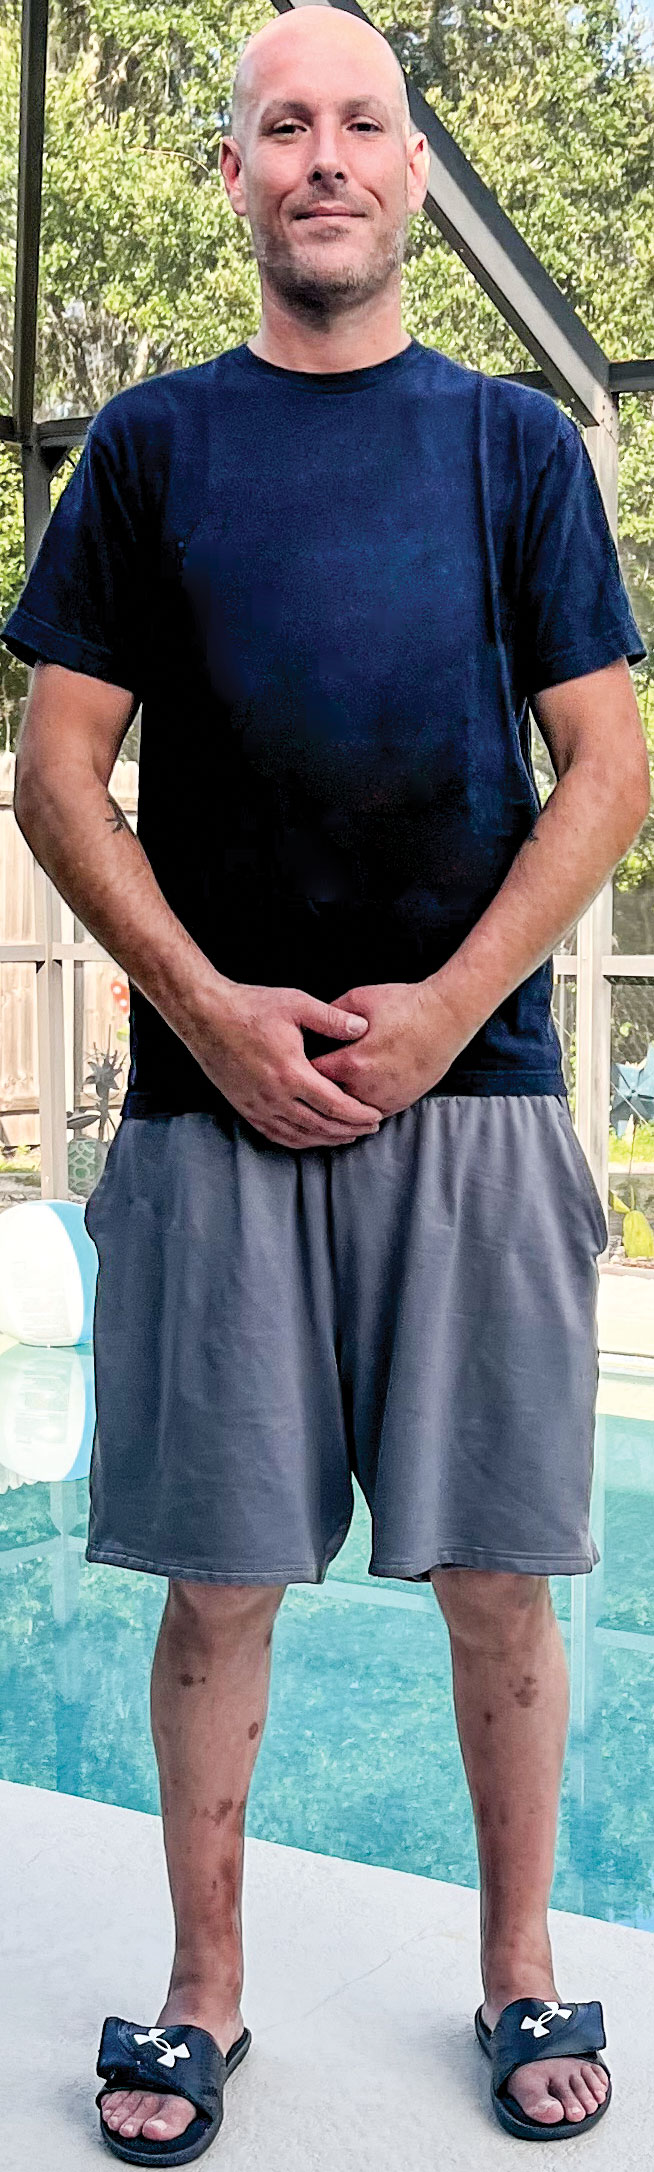 Clint McGeachy standing by pool in shorts